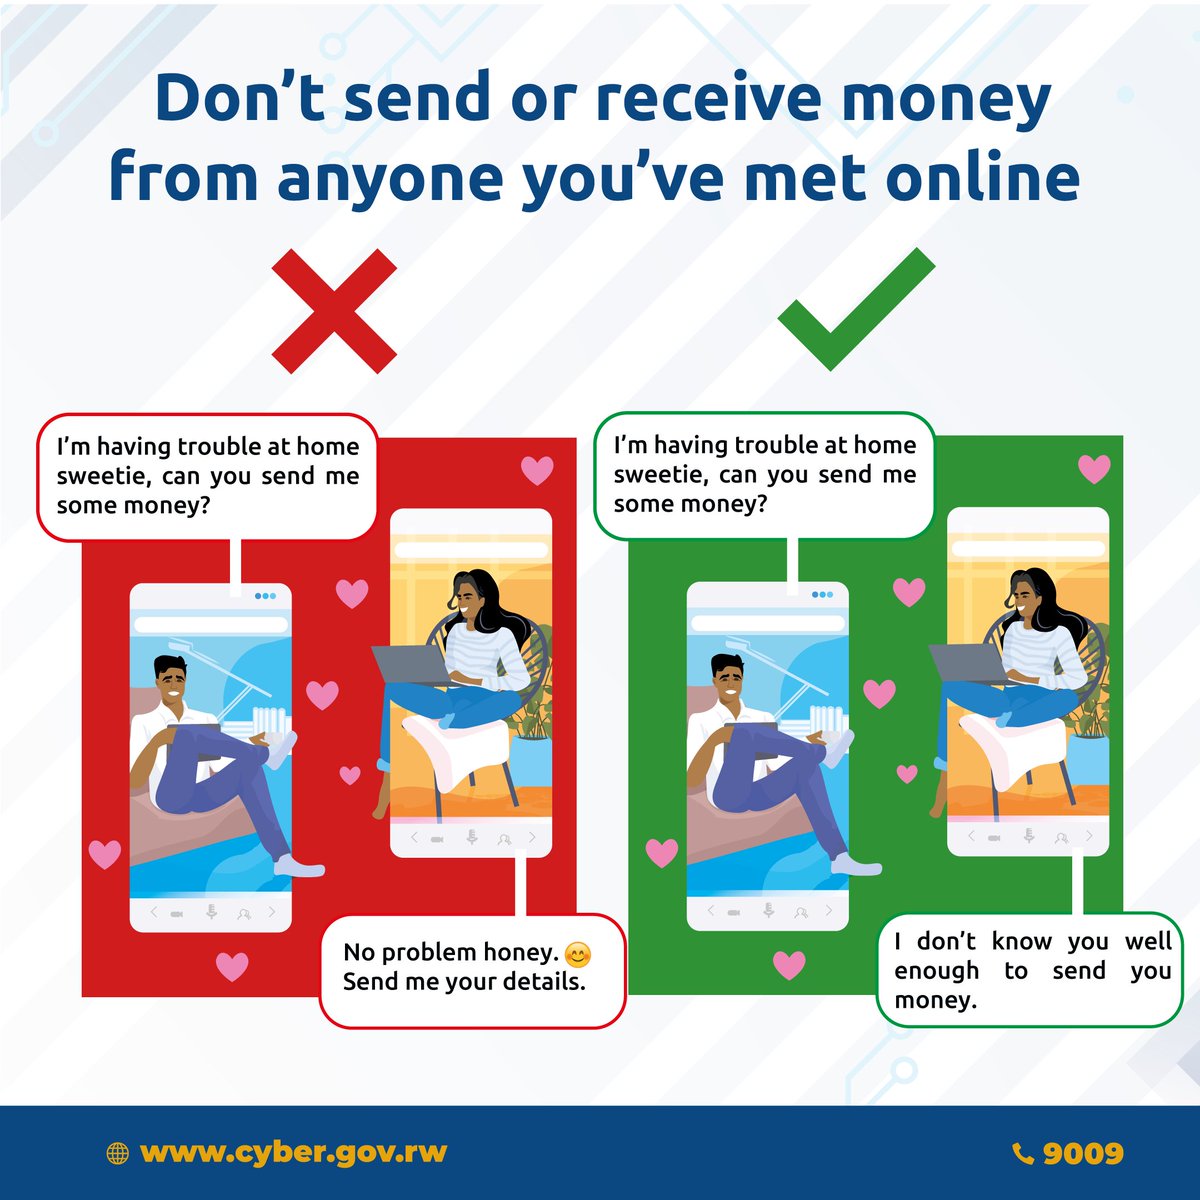 Malicious actors can create convincing fake profiles and use romance to lure people into sending them money.

No matter how persuasive their story is, never send money to someone from a dating app that you haven’t met in person.

#stoponlinescams